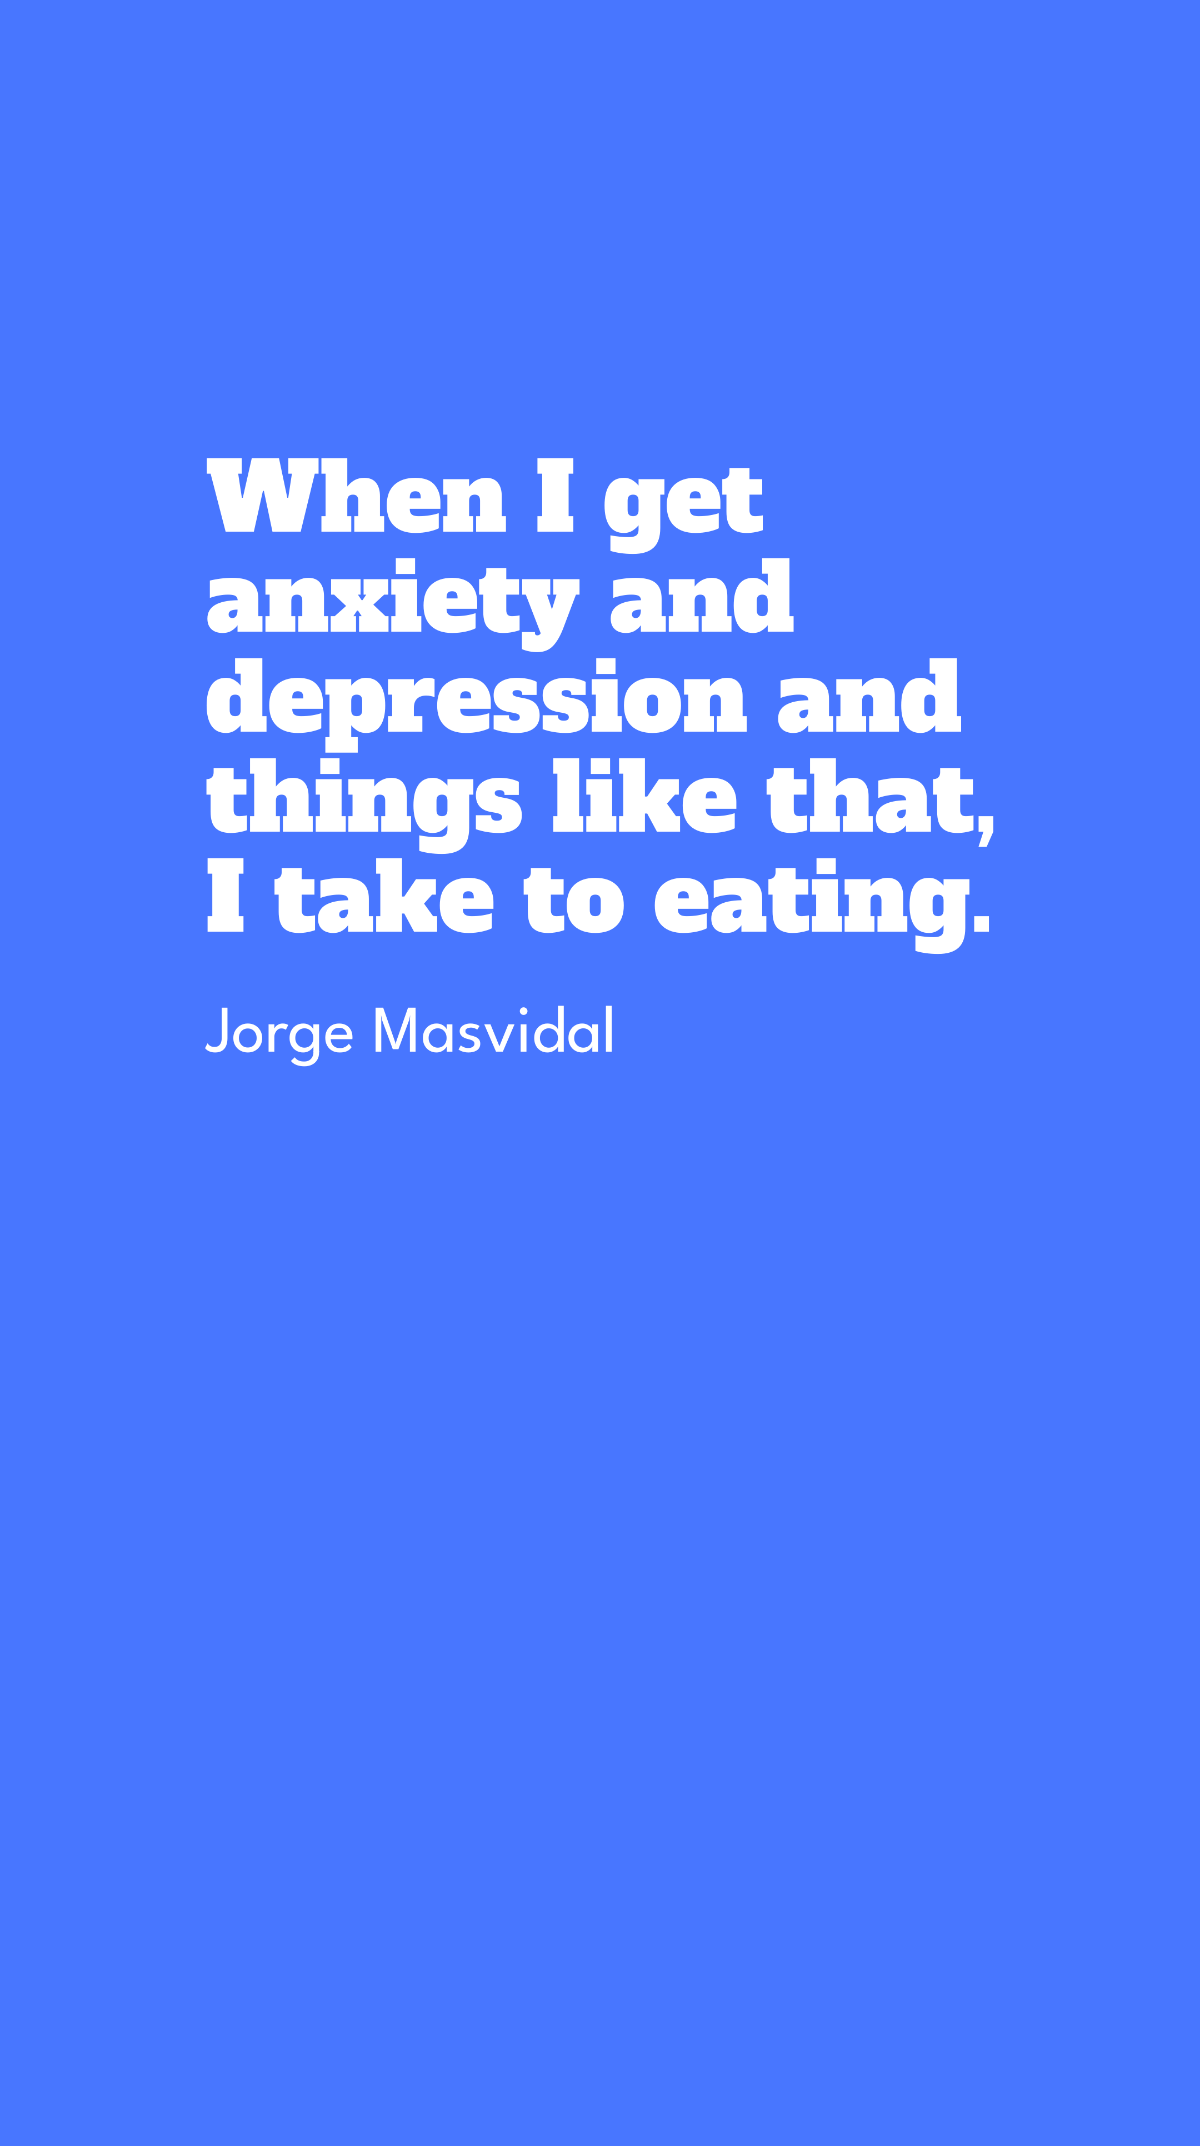 Free Jorge Masvidal - When I get anxiety and depression and things like that, I take to eating. Template